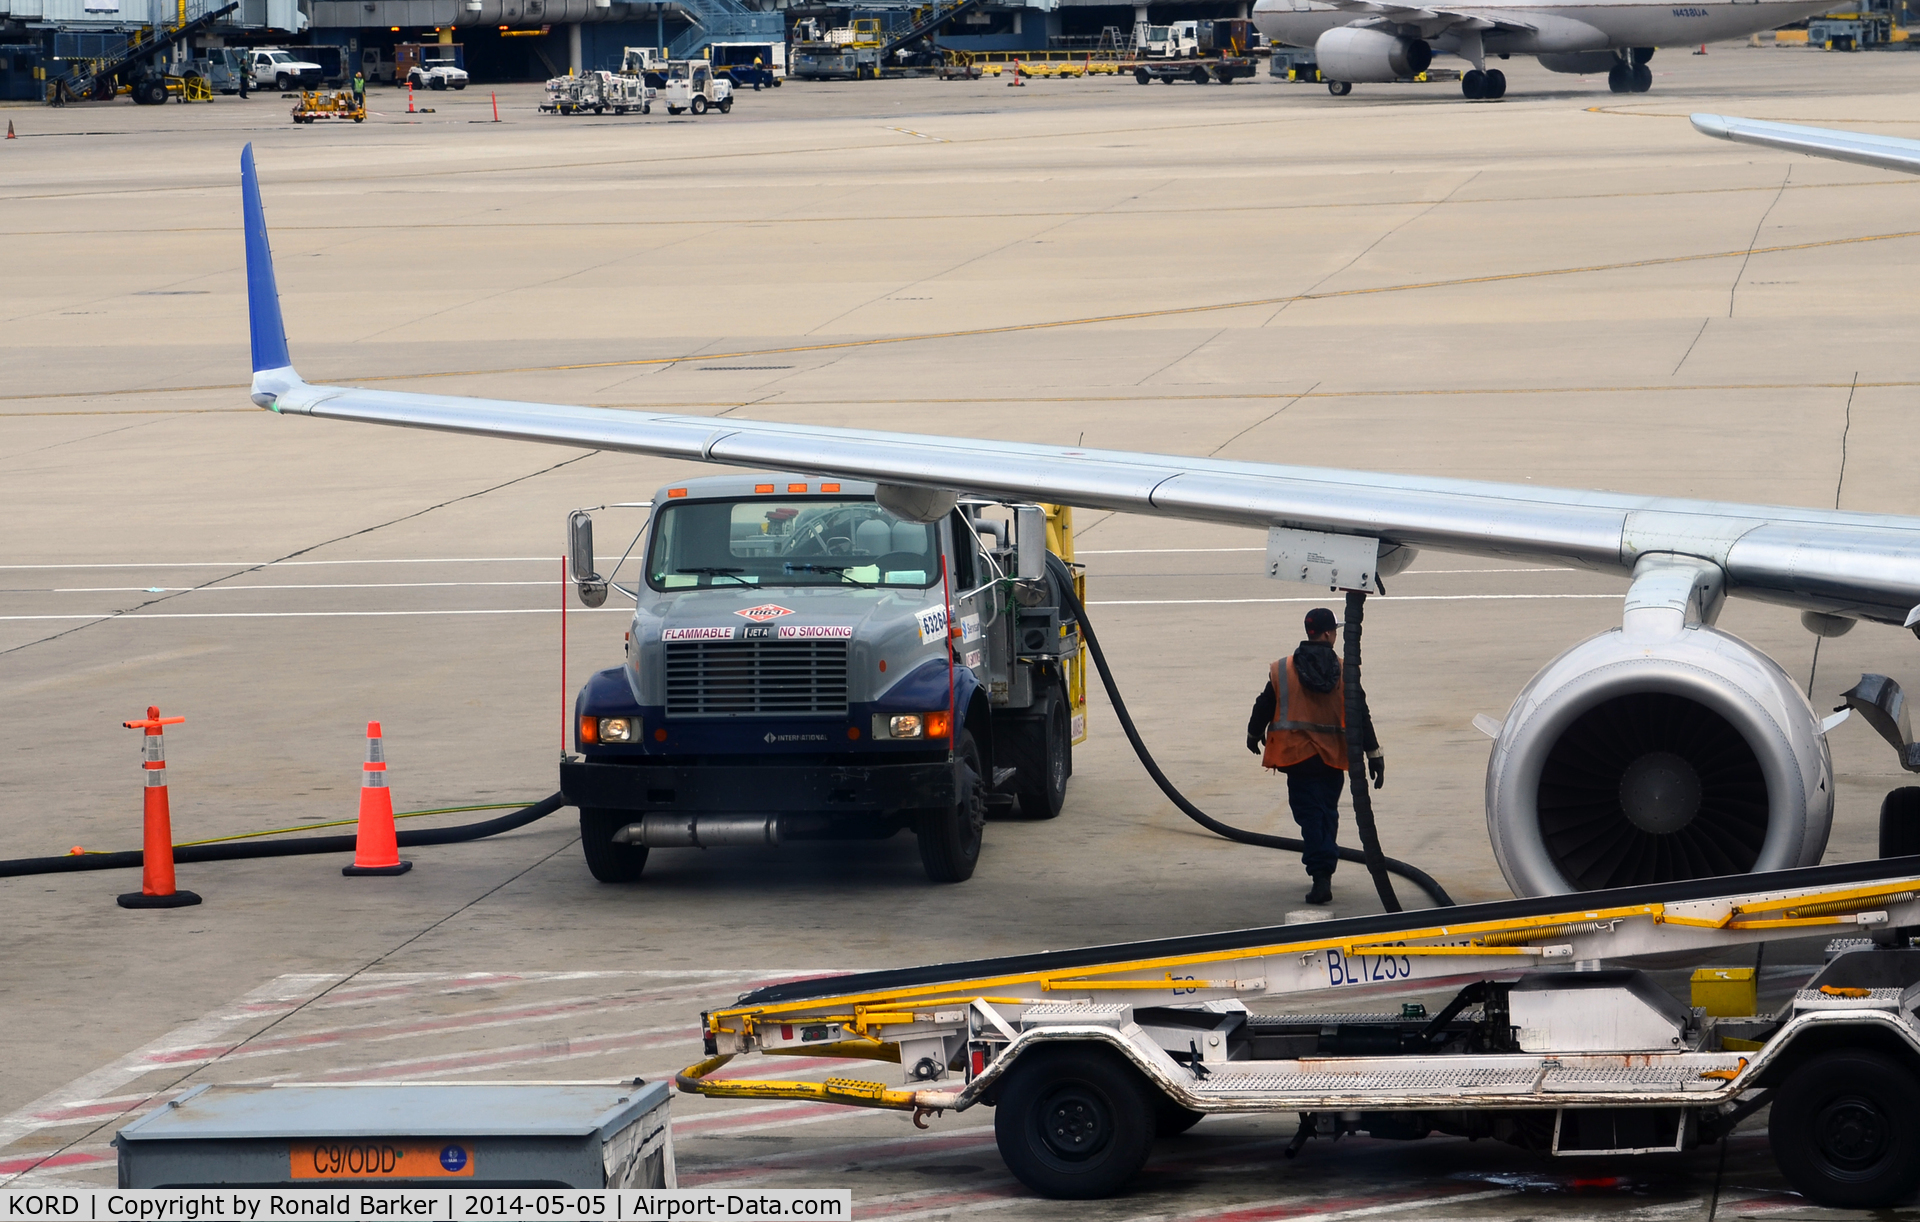 Chicago O'hare International Airport (ORD) - Pumping fuel onto an aircraft O'Hare